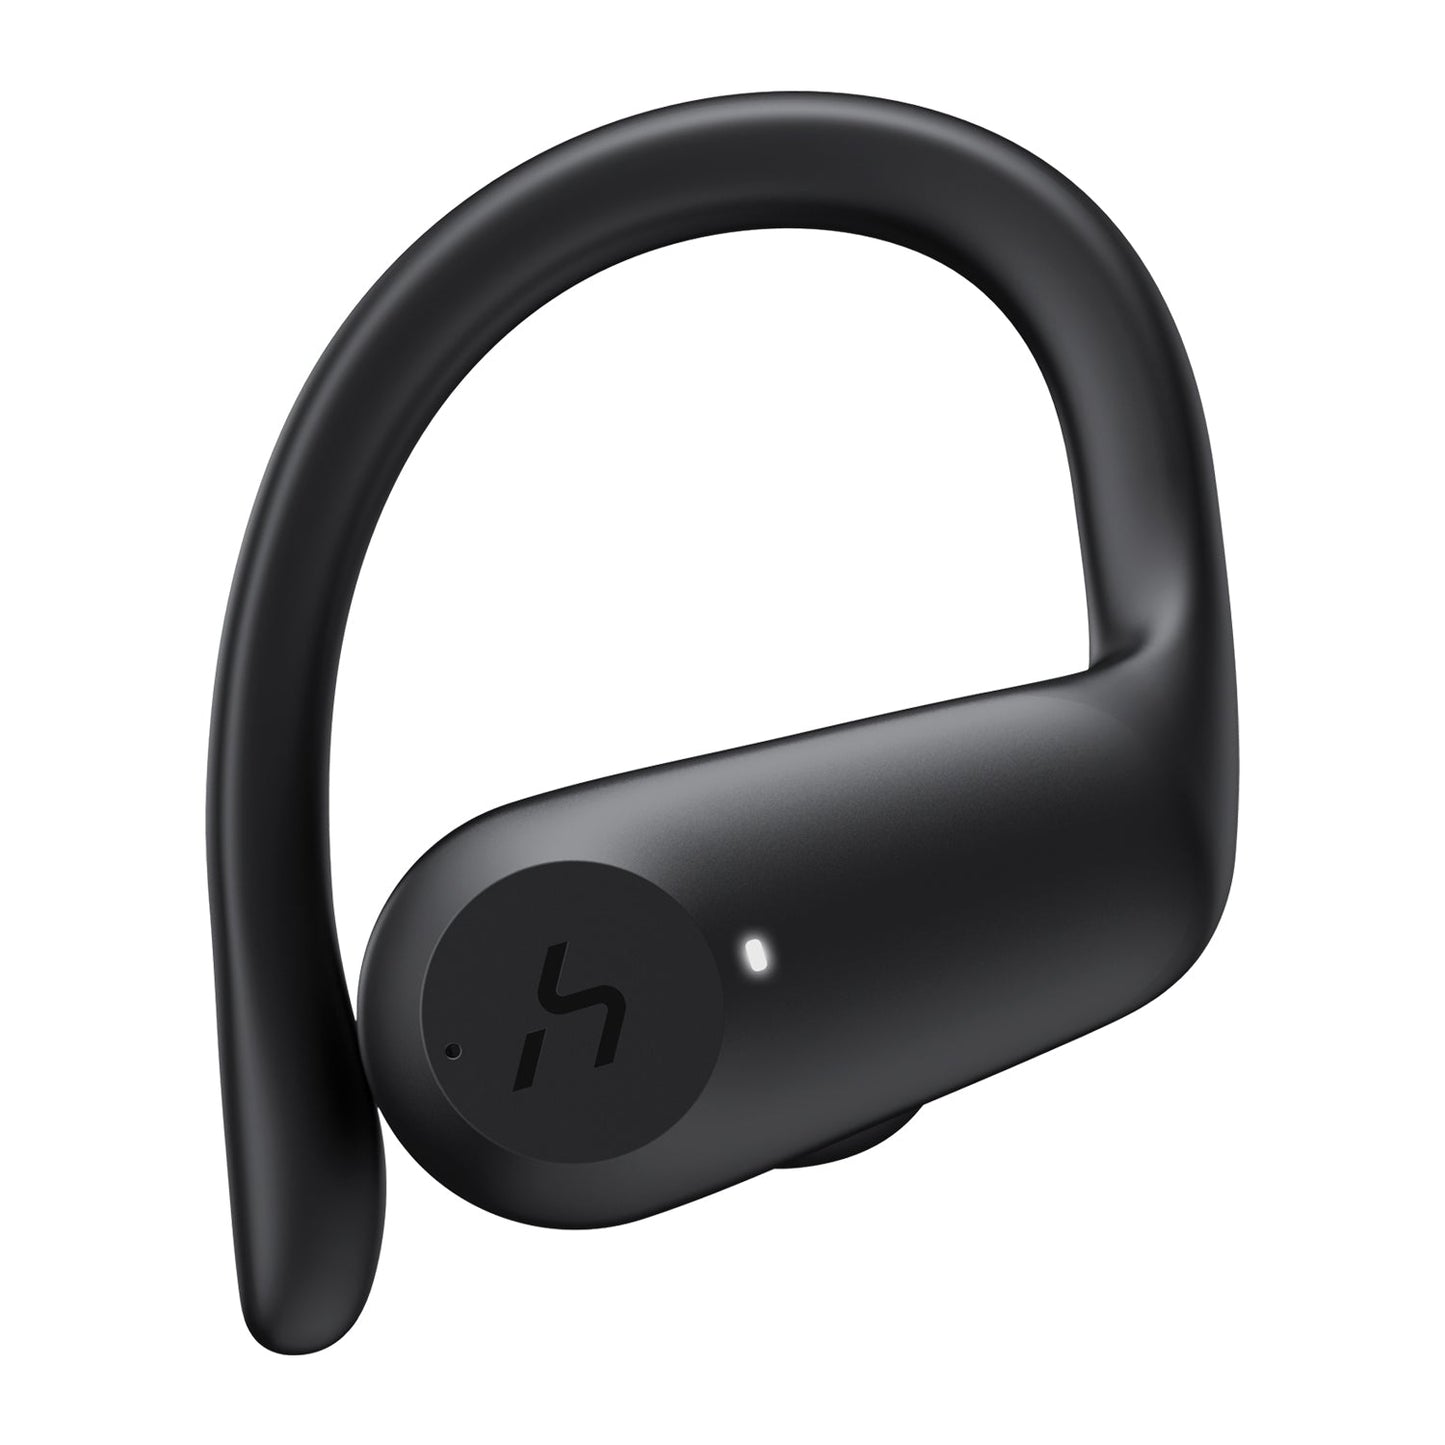 HAKII Action Workout Wireless Earbuds For Gym, Exercise, Running & More (Black)